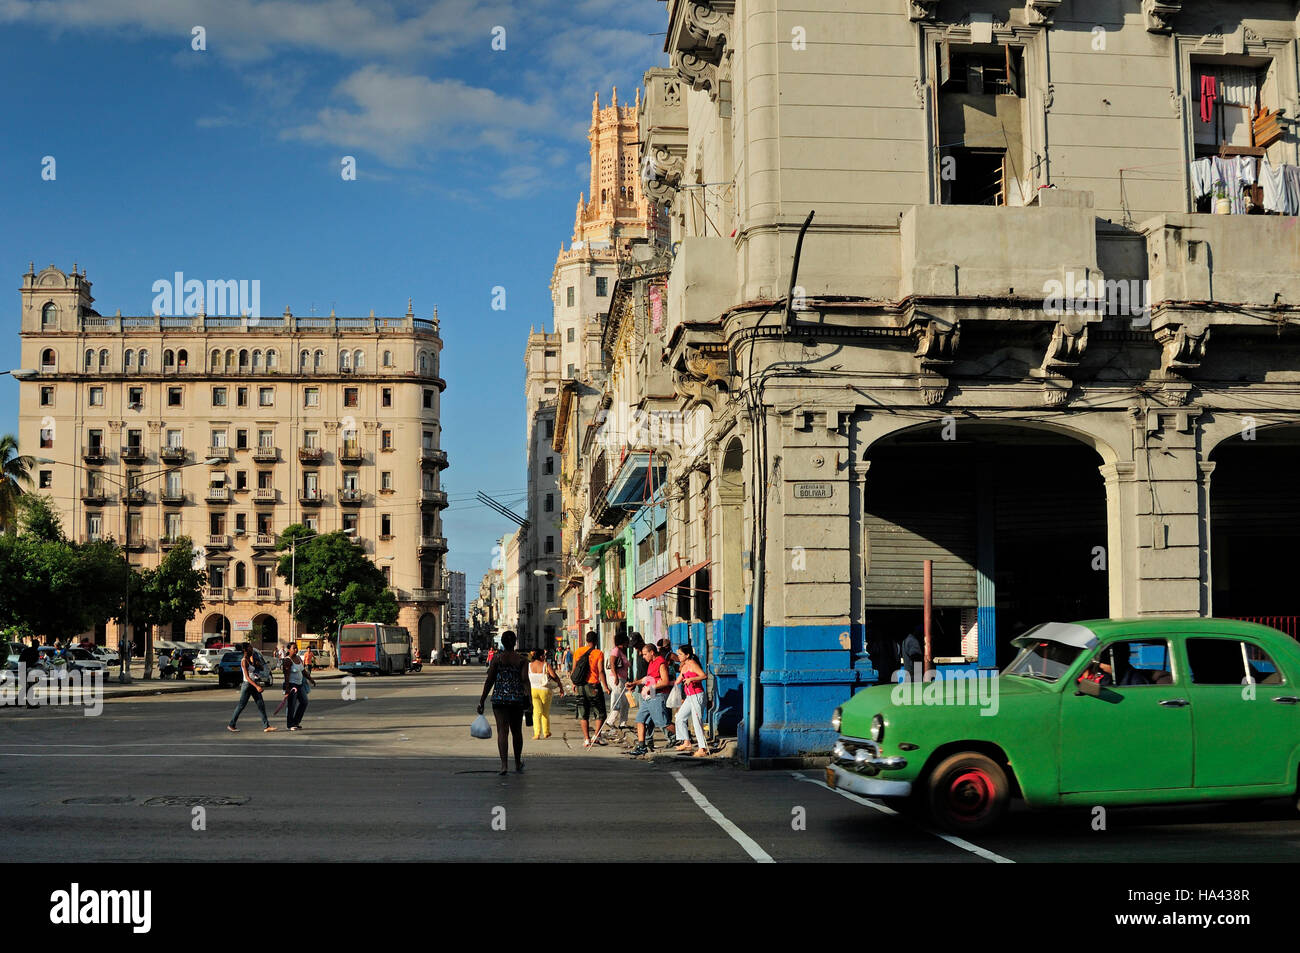 Havana, Cuba 11/2010. Street scene with classic car and old architecture in Havana town Stock Photo